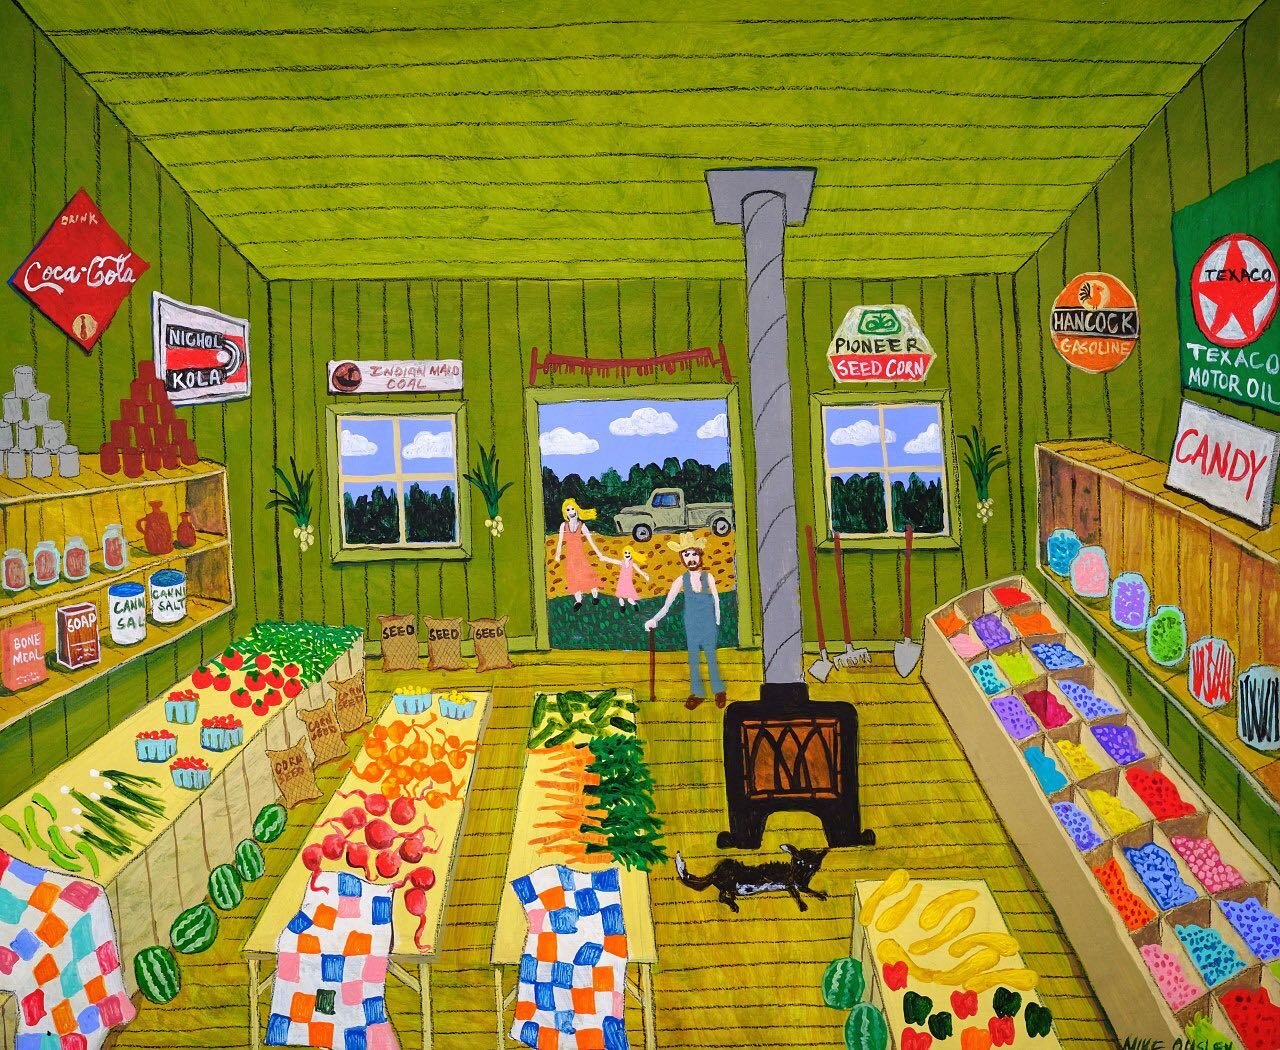 &ldquo;Country Store,&rdquo; Mike Ousley
Acrylic on Panel, 20&rdquo;x24&rdquo;

SOLD

@haleyfineart 
@mike_ousley_art 

#acrylicpainting #folkart #patternpainting #storypainting #produce #countryliving #countrystore #cornerstore